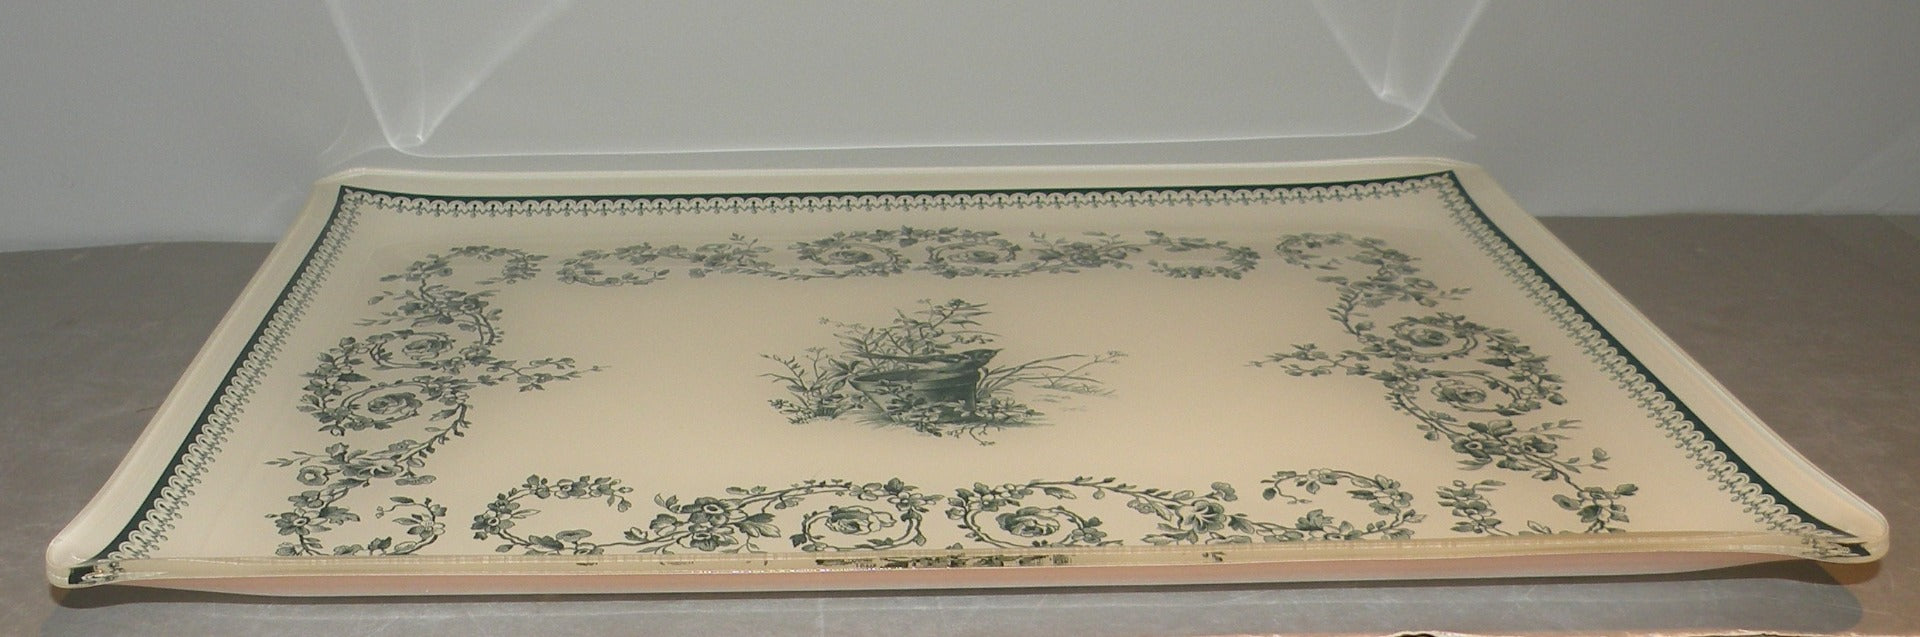 acrylic serving tray small  Oiseau , Les Depareillees